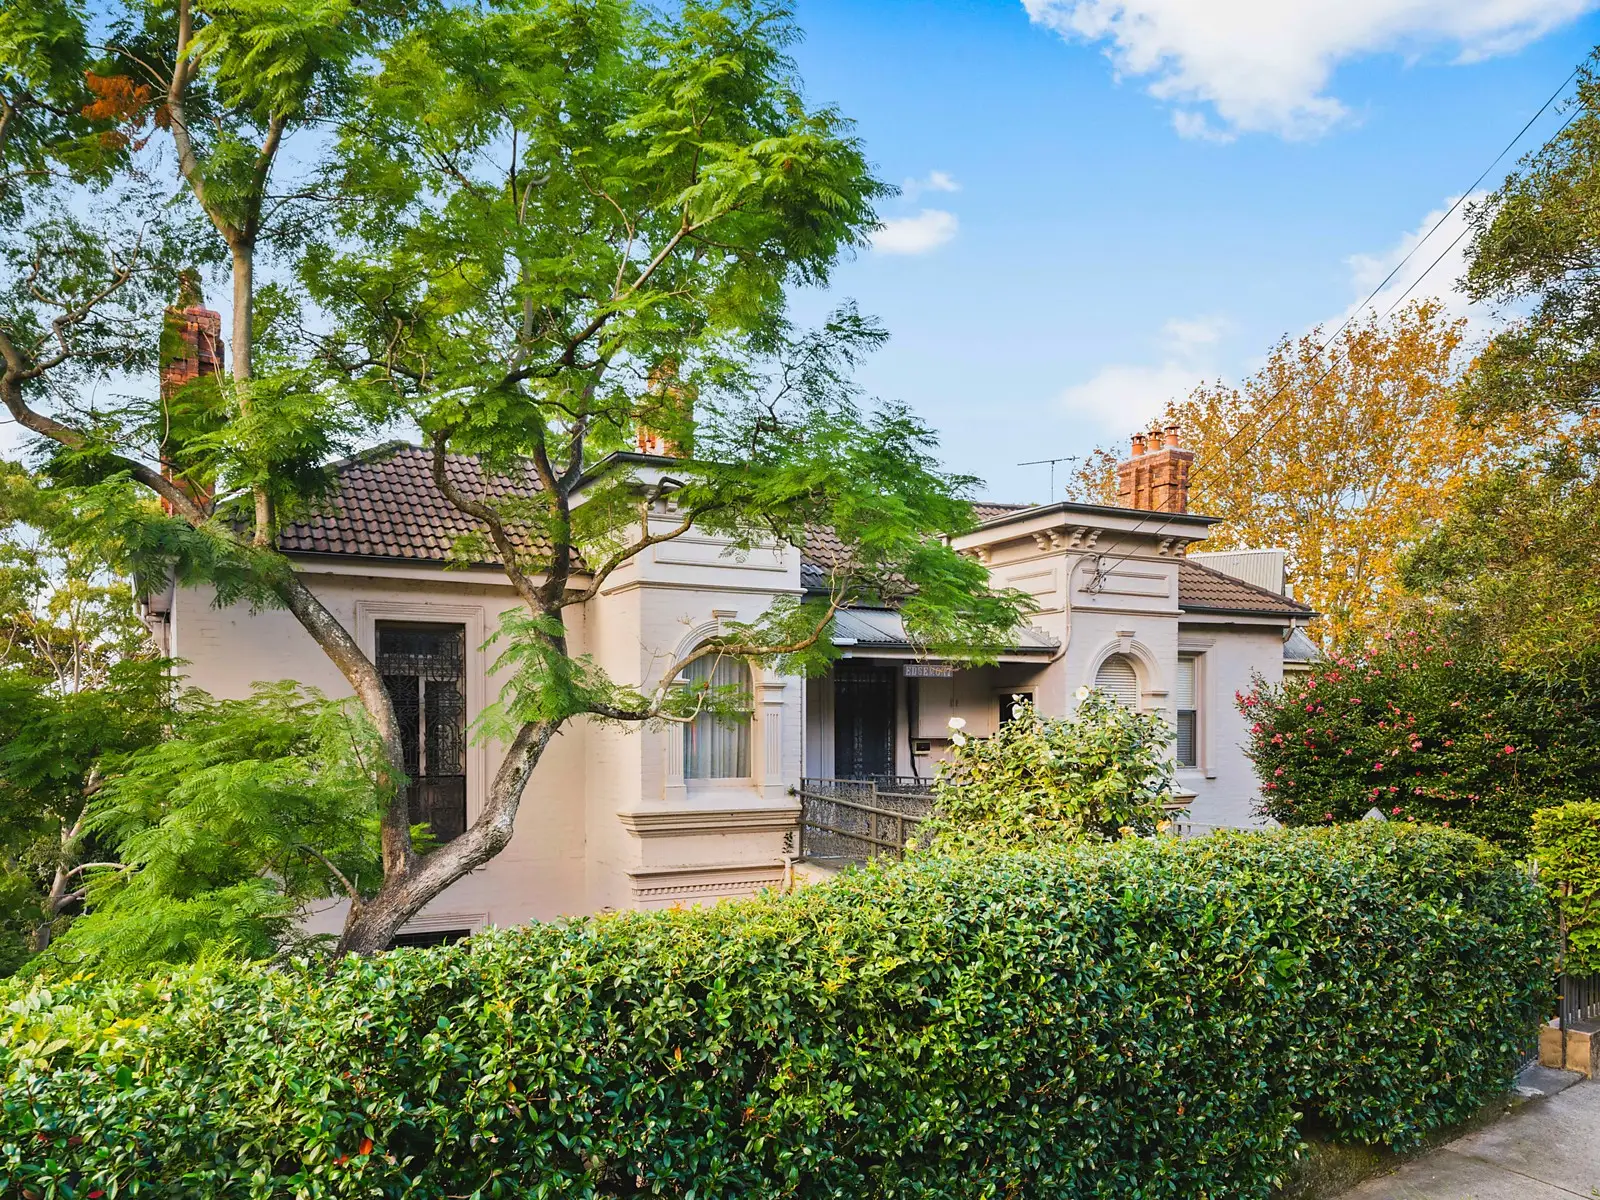 Photo #1: 7/289-291 Edgecliff Road, Woollahra - Sold by Sydney Sotheby's International Realty